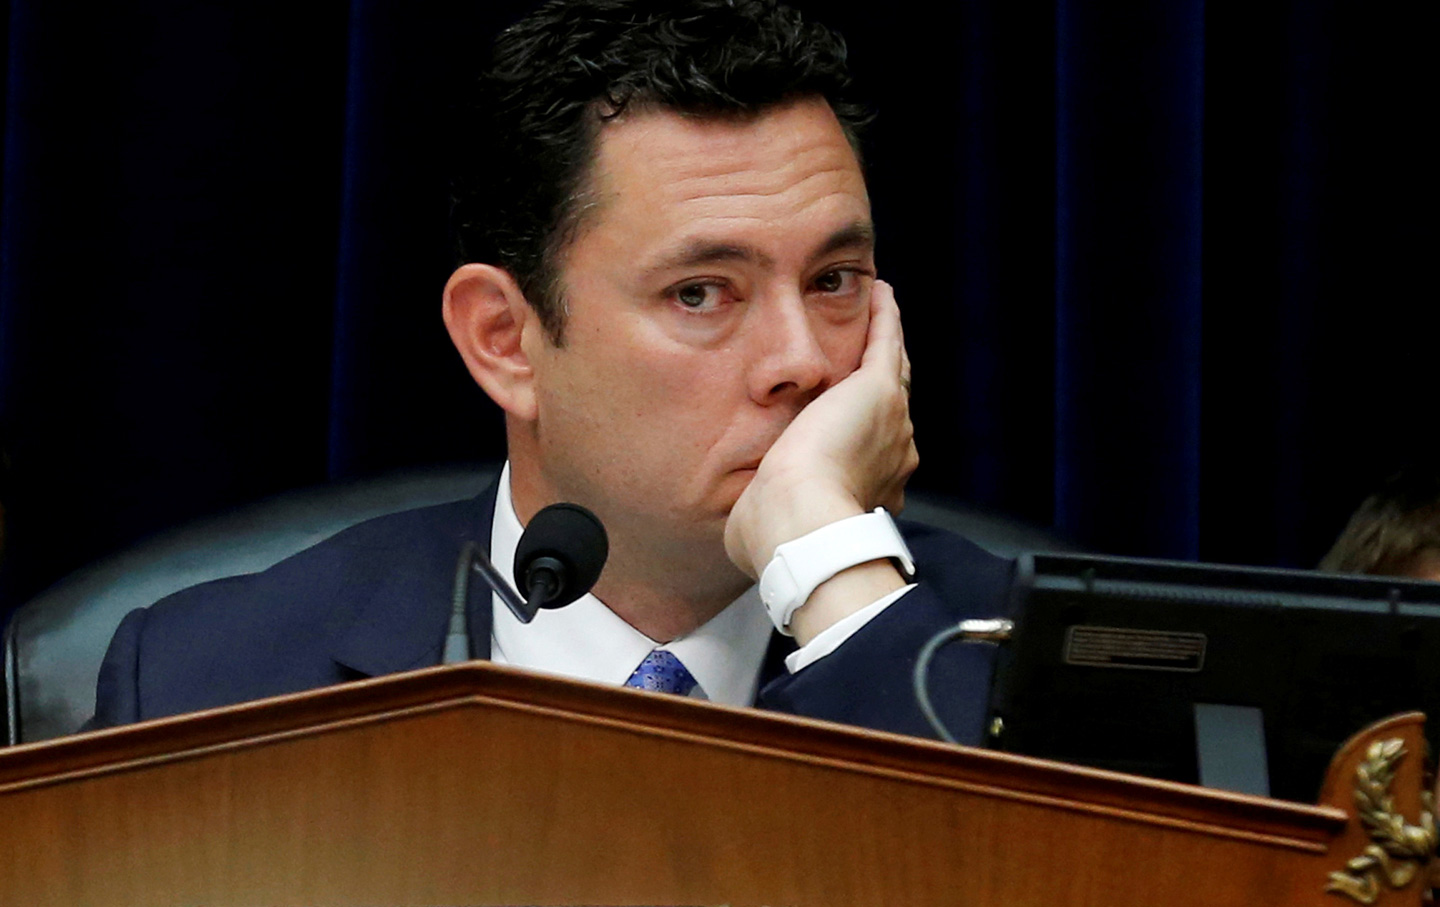 Jason Chaffetz’s Pity Party Is Everything That Is Wrong With a 1 Percent Congress